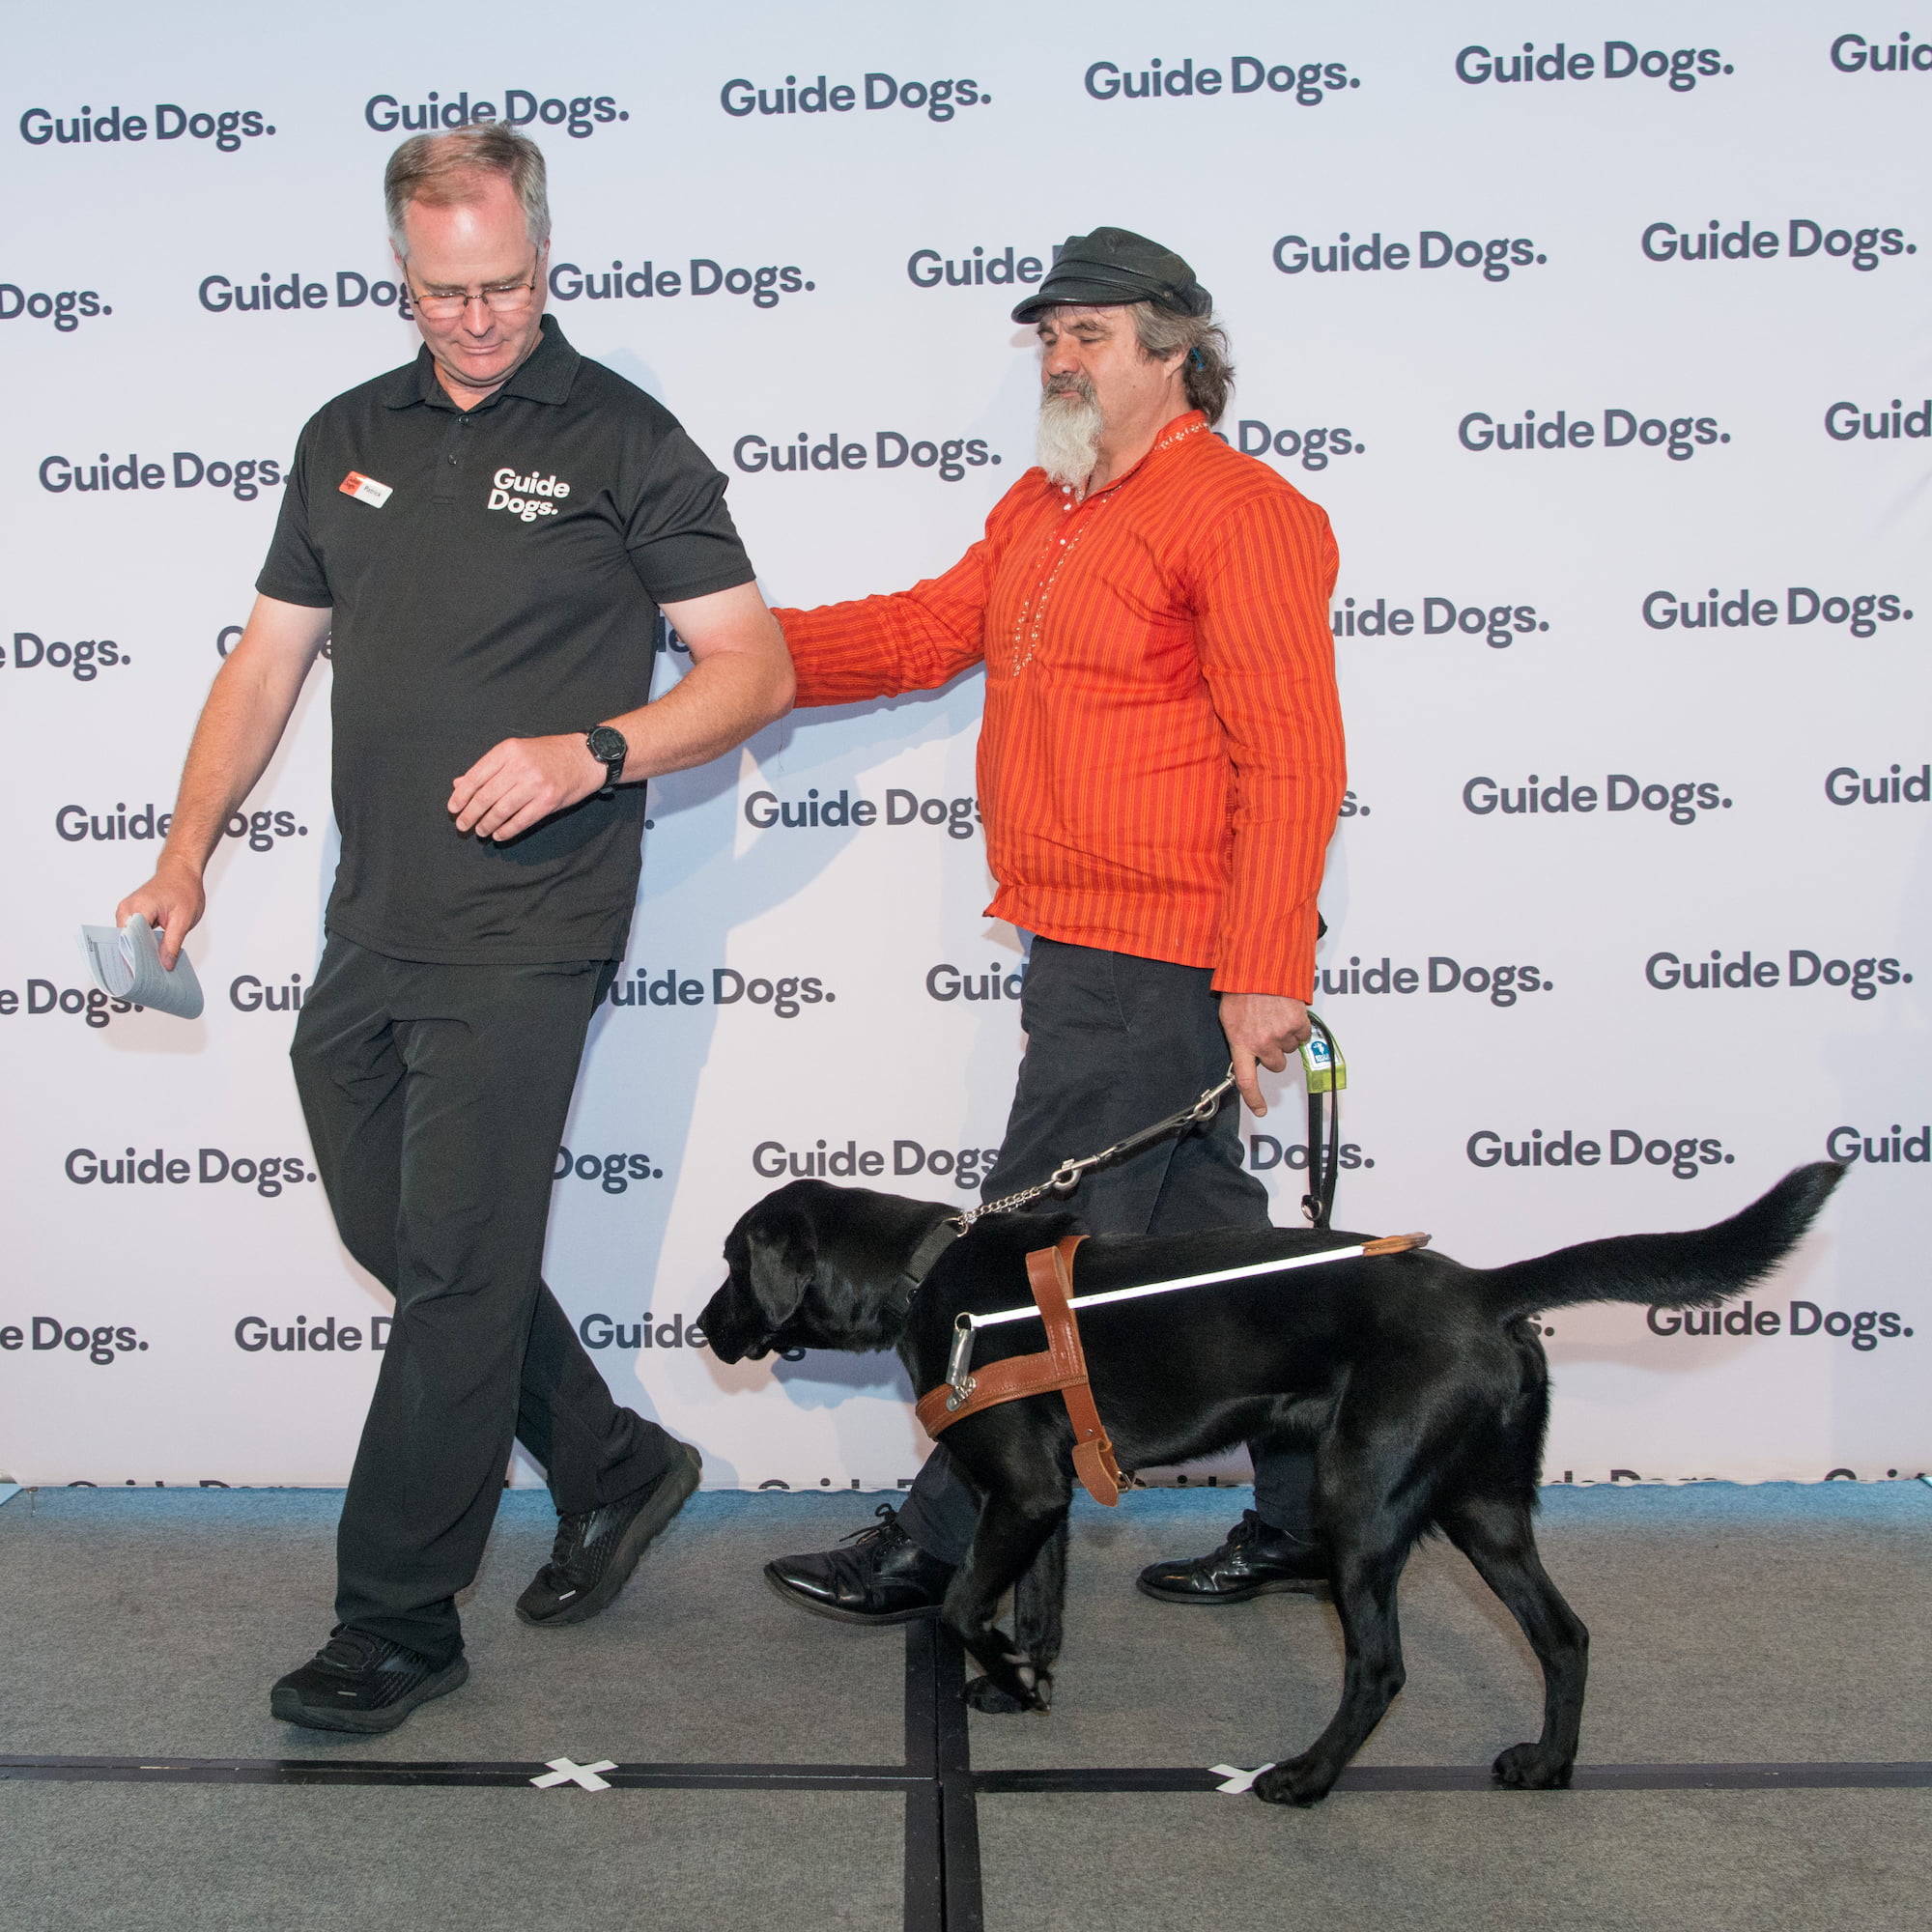 Guide Dogs Client Anthony with his Guide Dog Kit, a black Labrador wearing a harness, being led on stage by a Guide Dogs staff member.